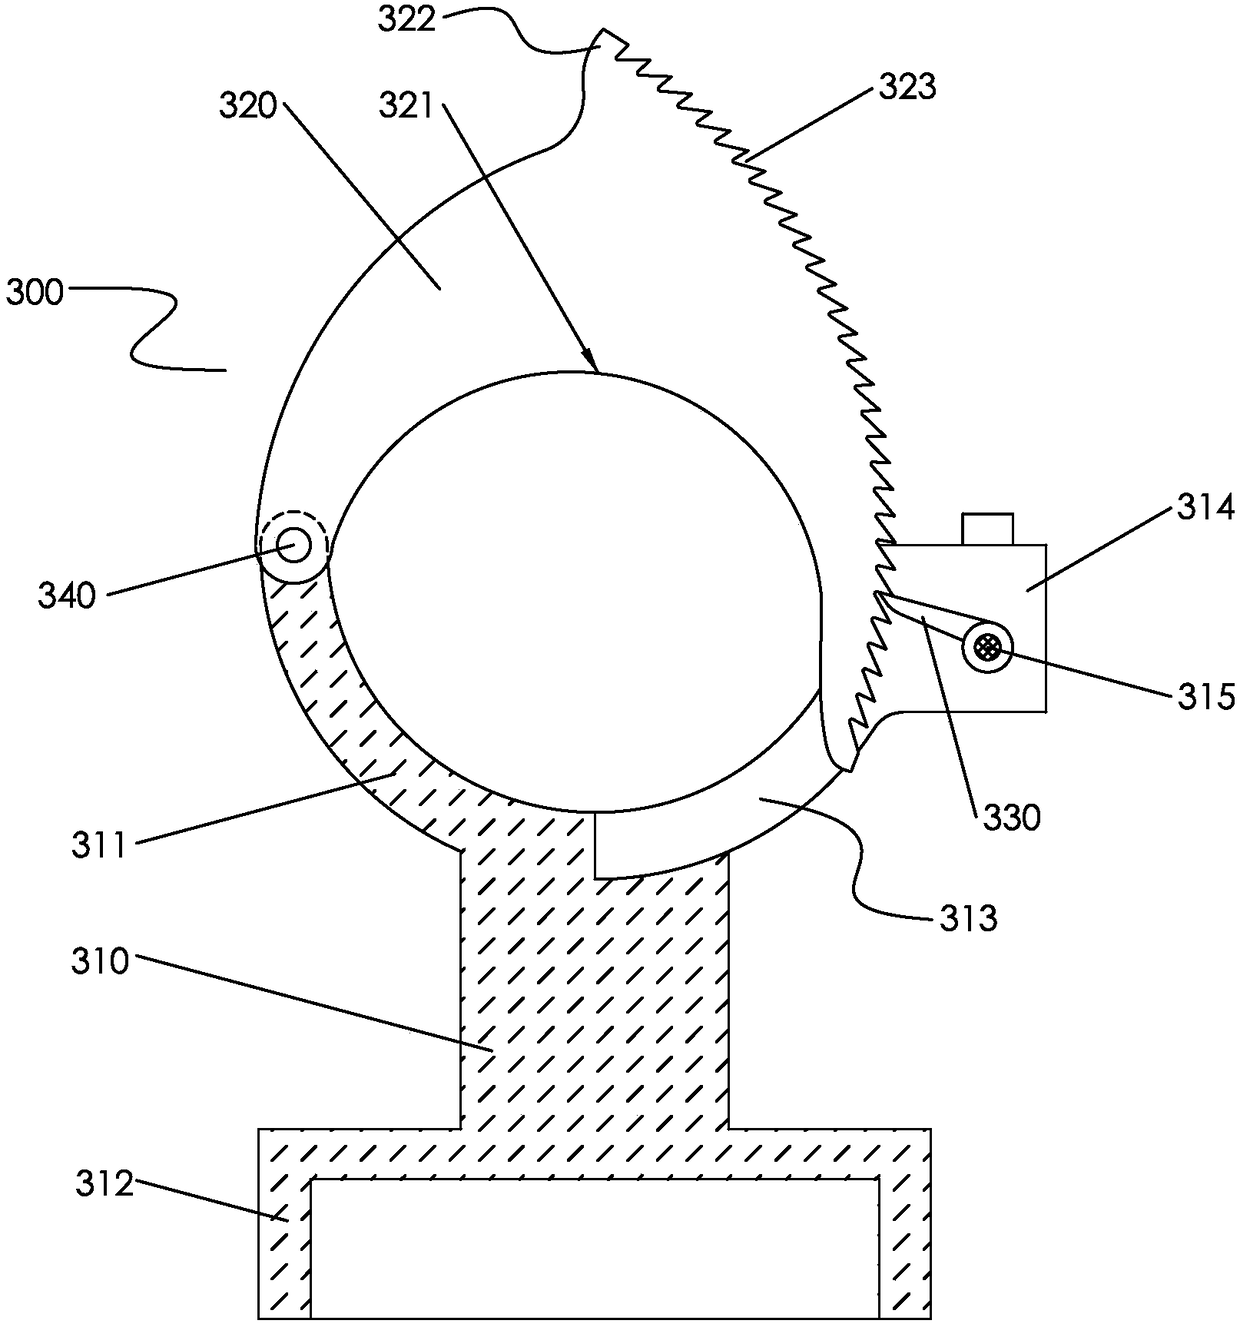 Insulated holding pole device for replacing drop-out fuse